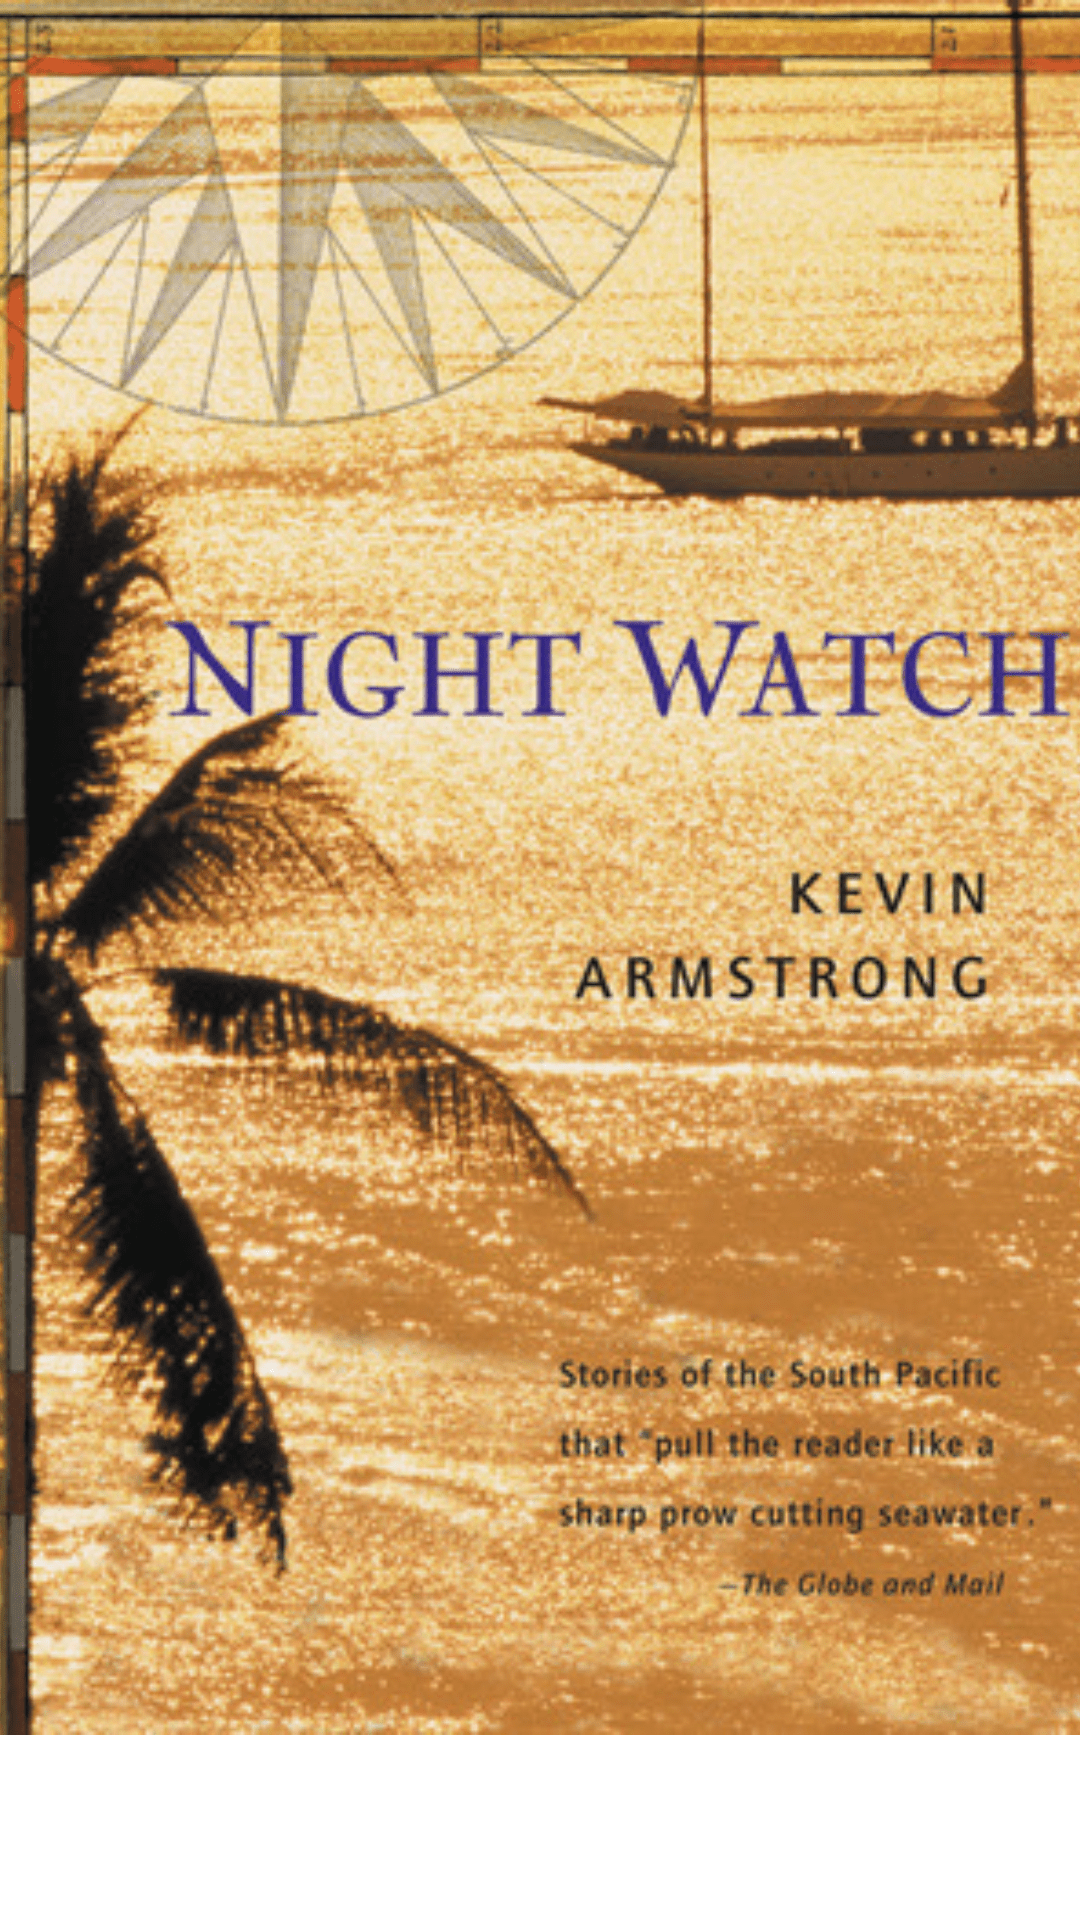 Night Watch by Kevin Armstrong